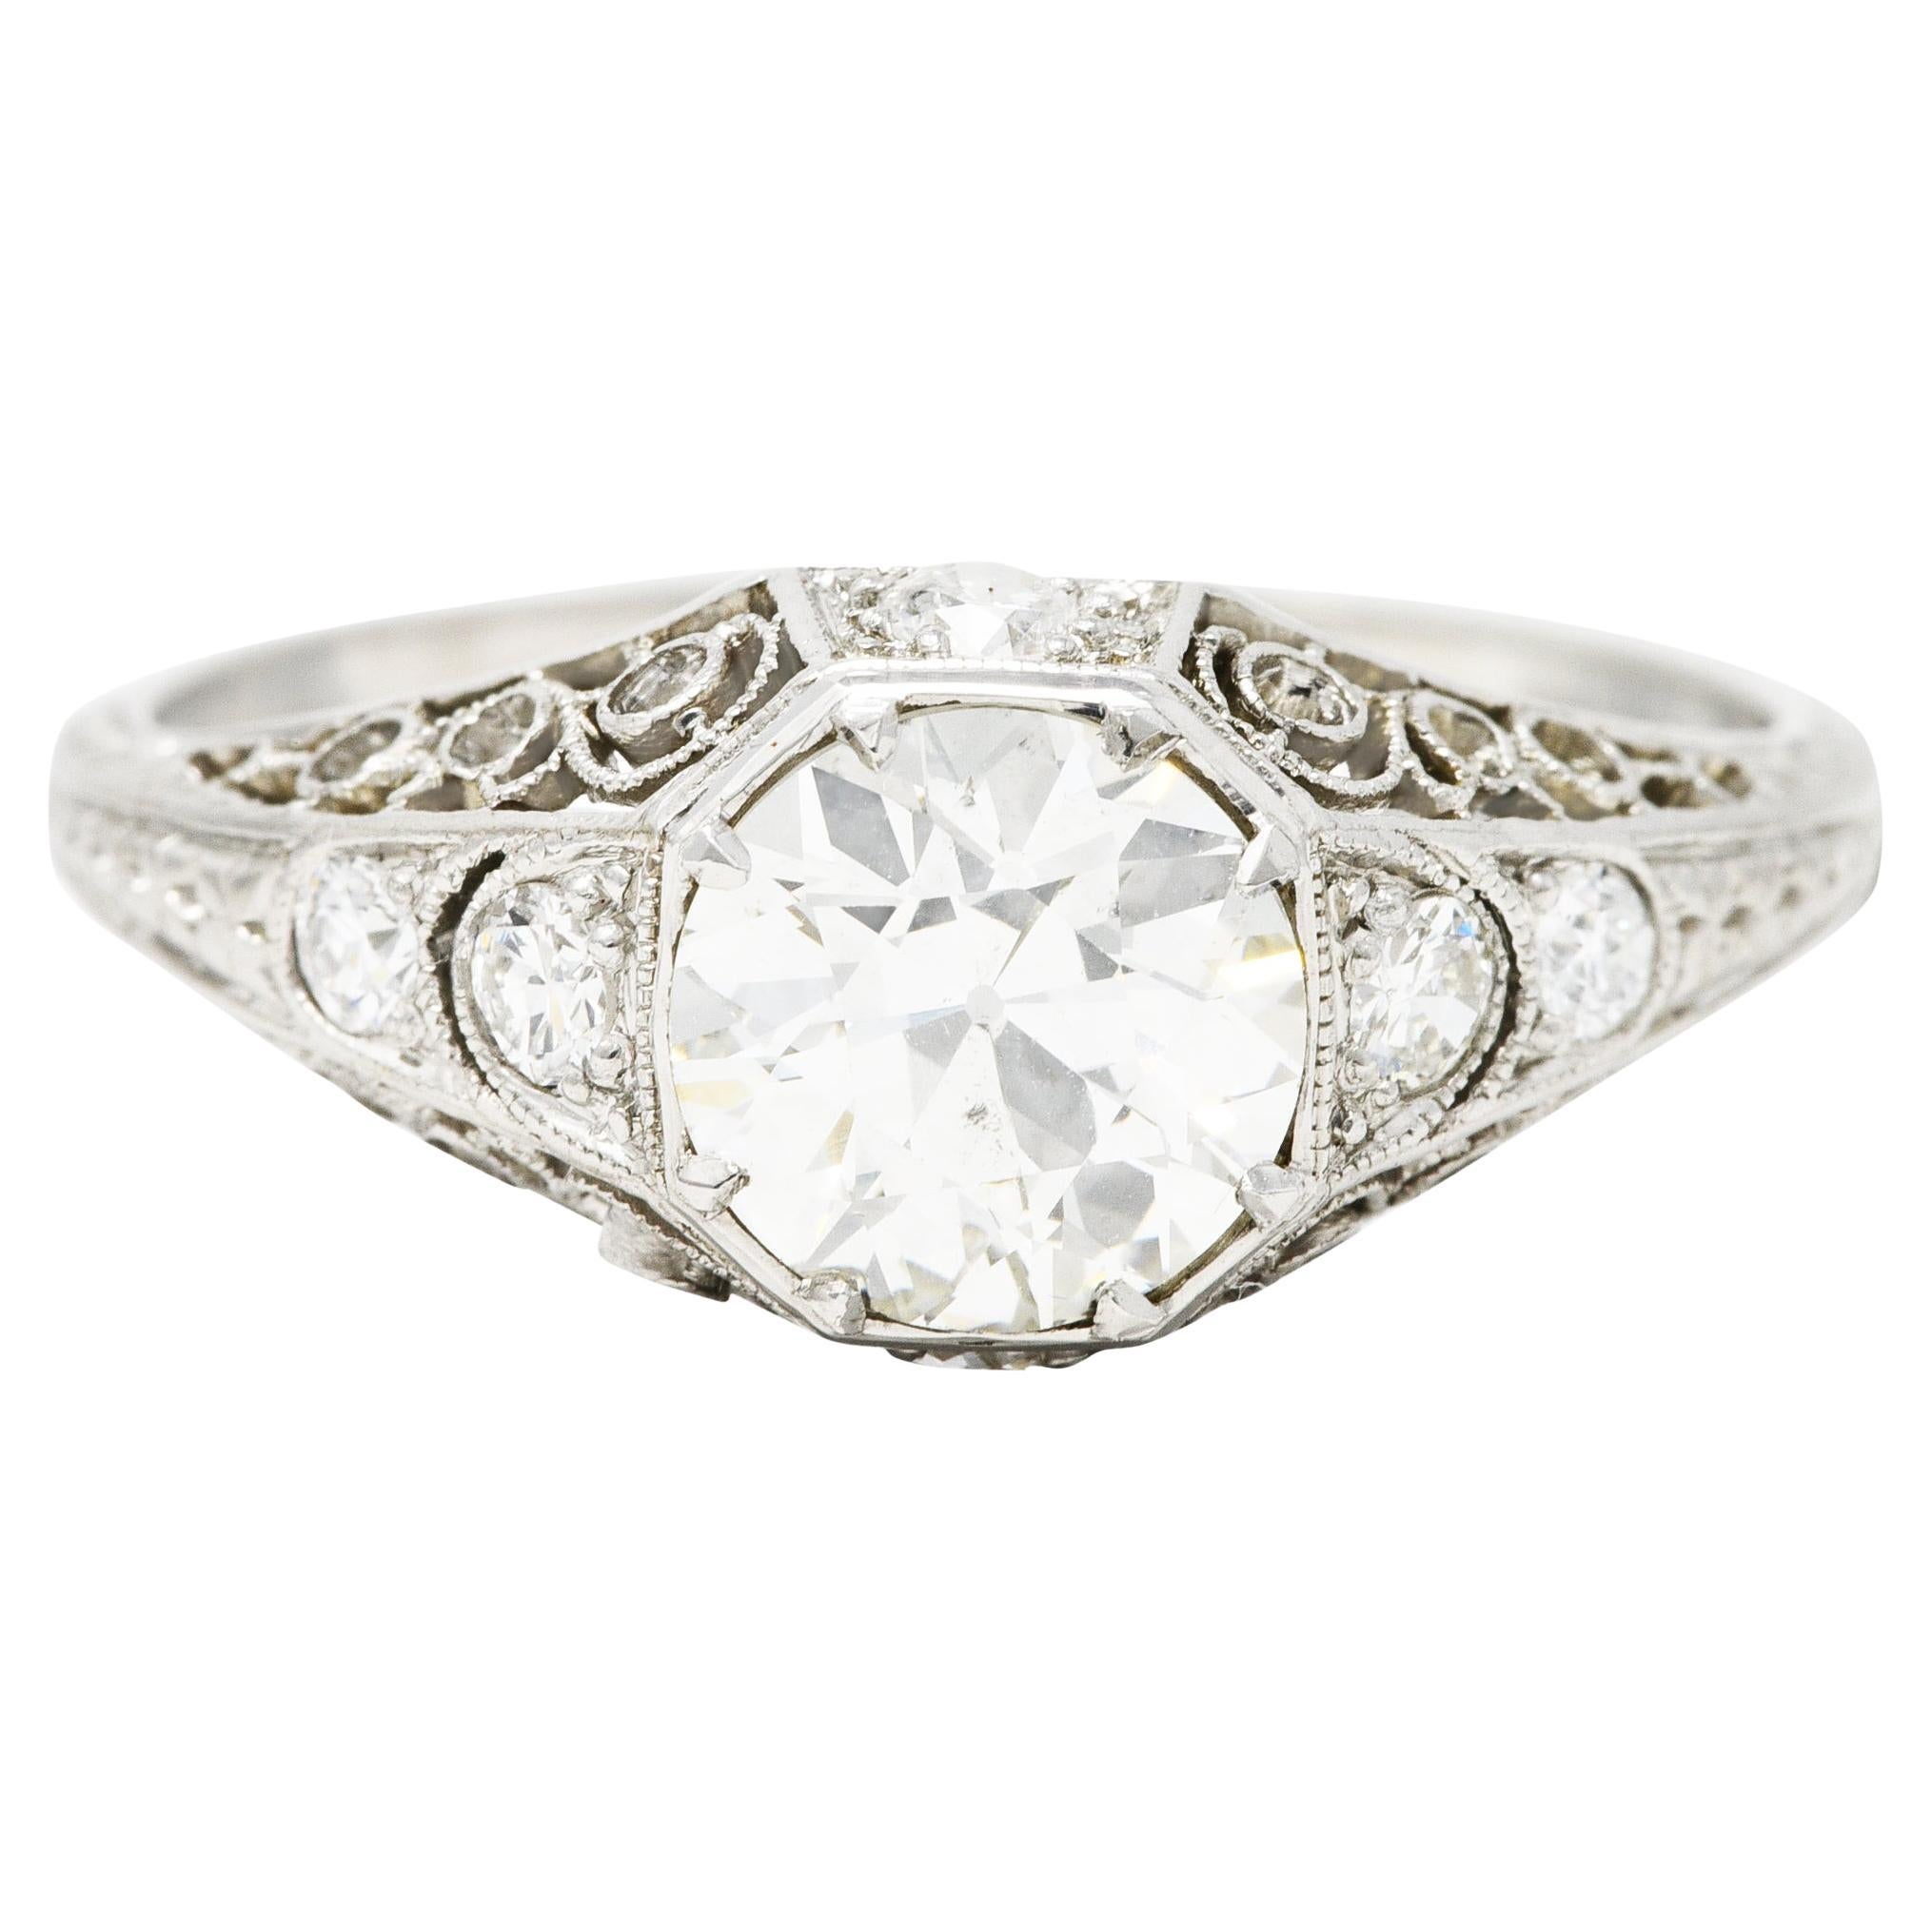 Early Art Deco 1.92 Carats Diamond Platinum Scrolled Filigree Engagement Ring For Sale